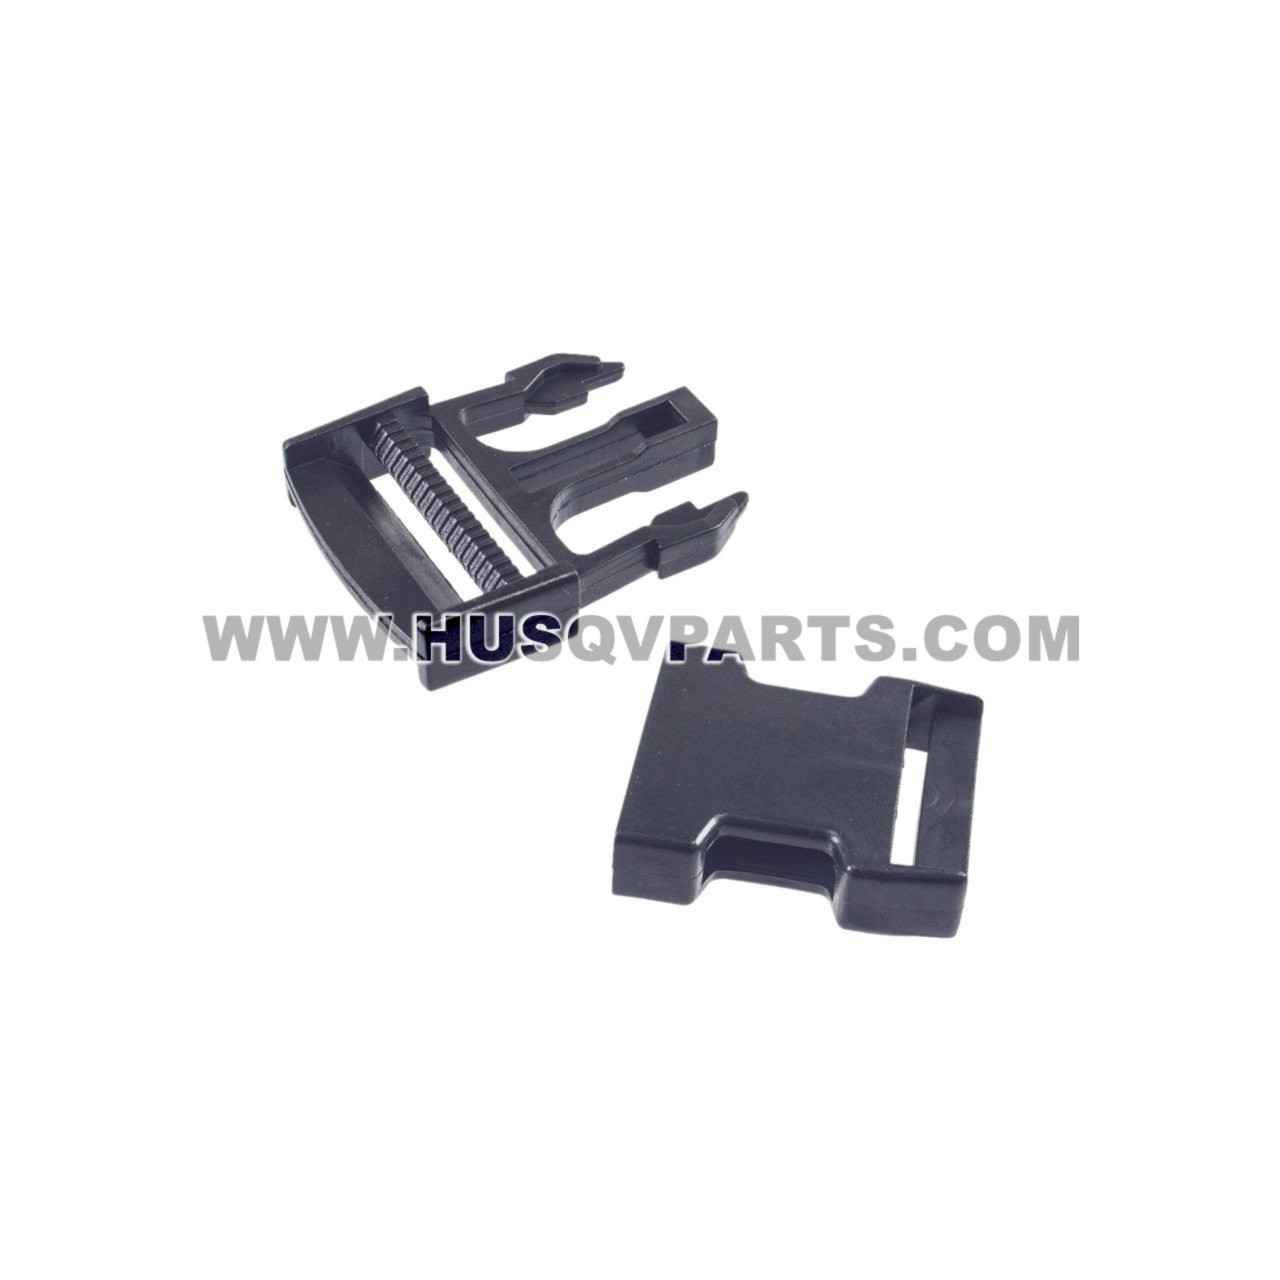 Waist Extenders and Buckles for Propective Apparel & Chaps